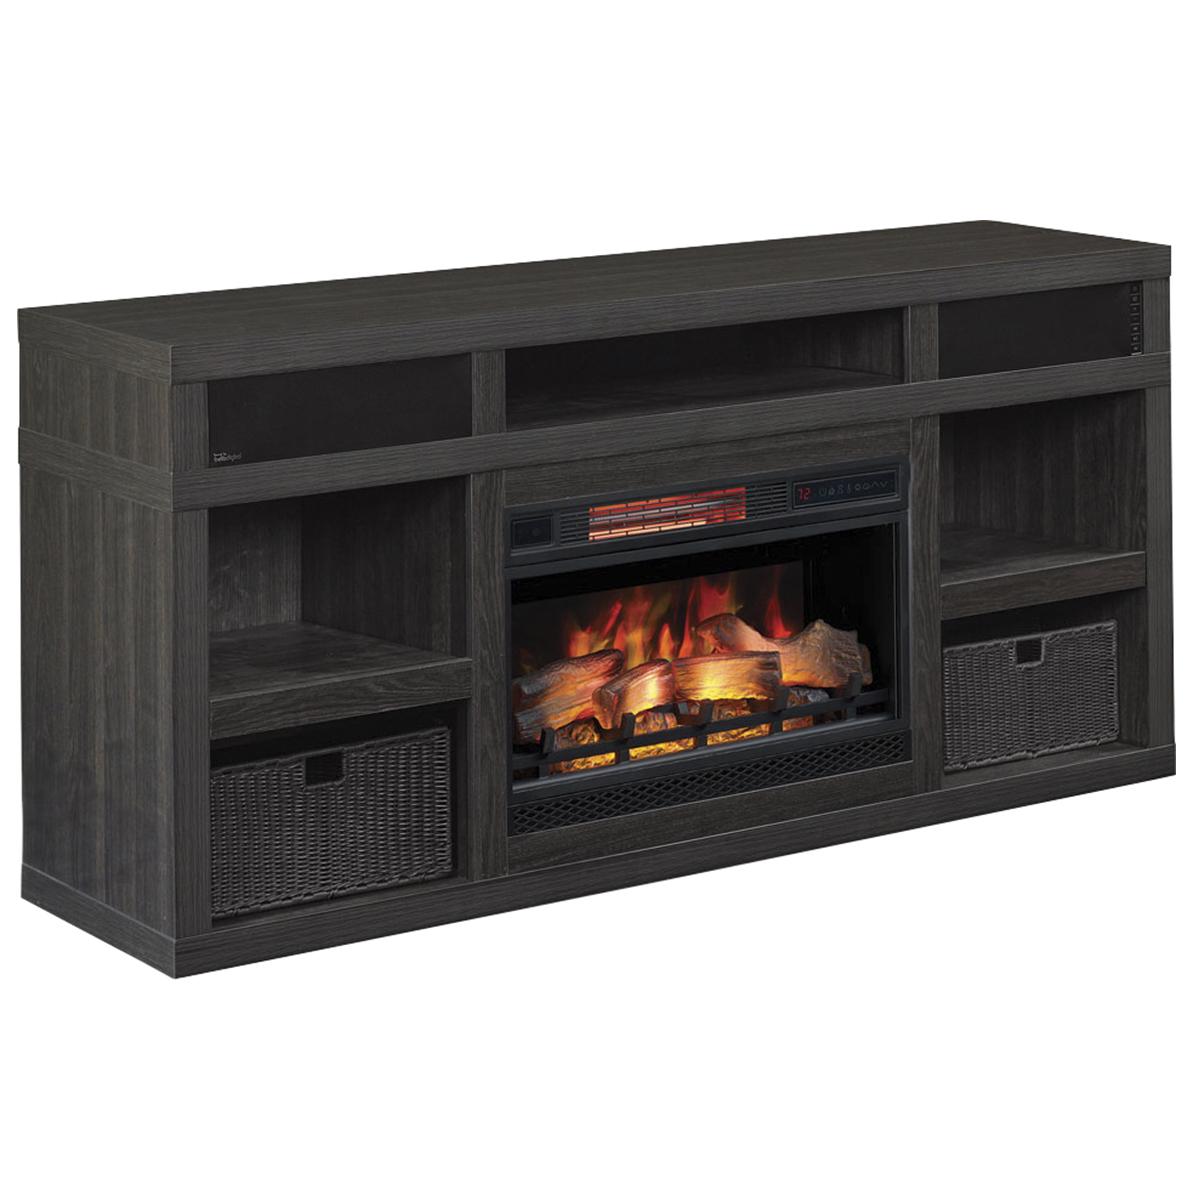 Tv Stand with Fireplace and soundbar Fresh Fabio Flames Greatlin 64" Tv Stand In Black Walnut